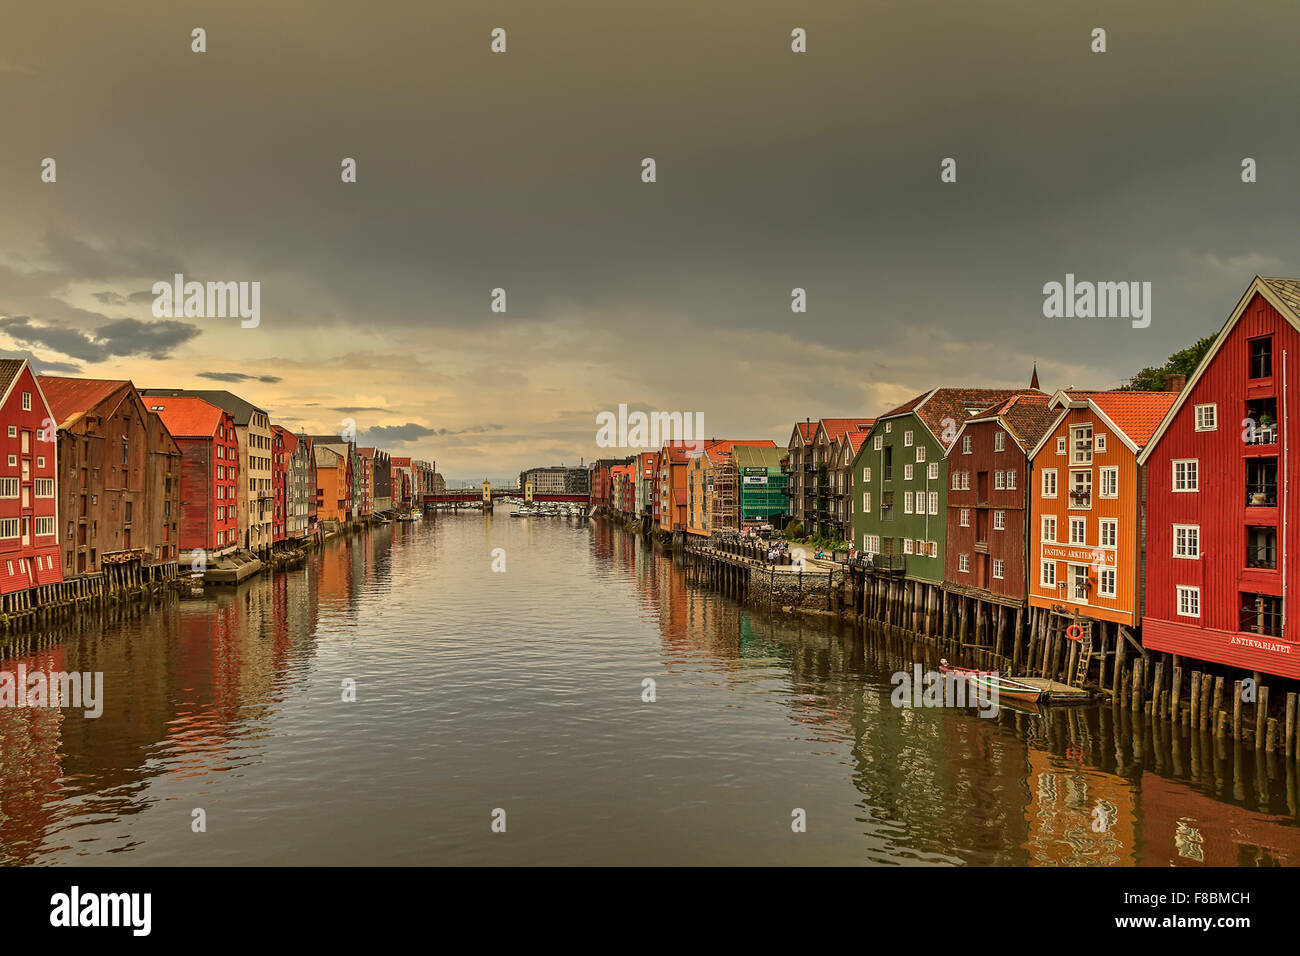 Old Warehouses On The River Trondheim Norway Stock Photo